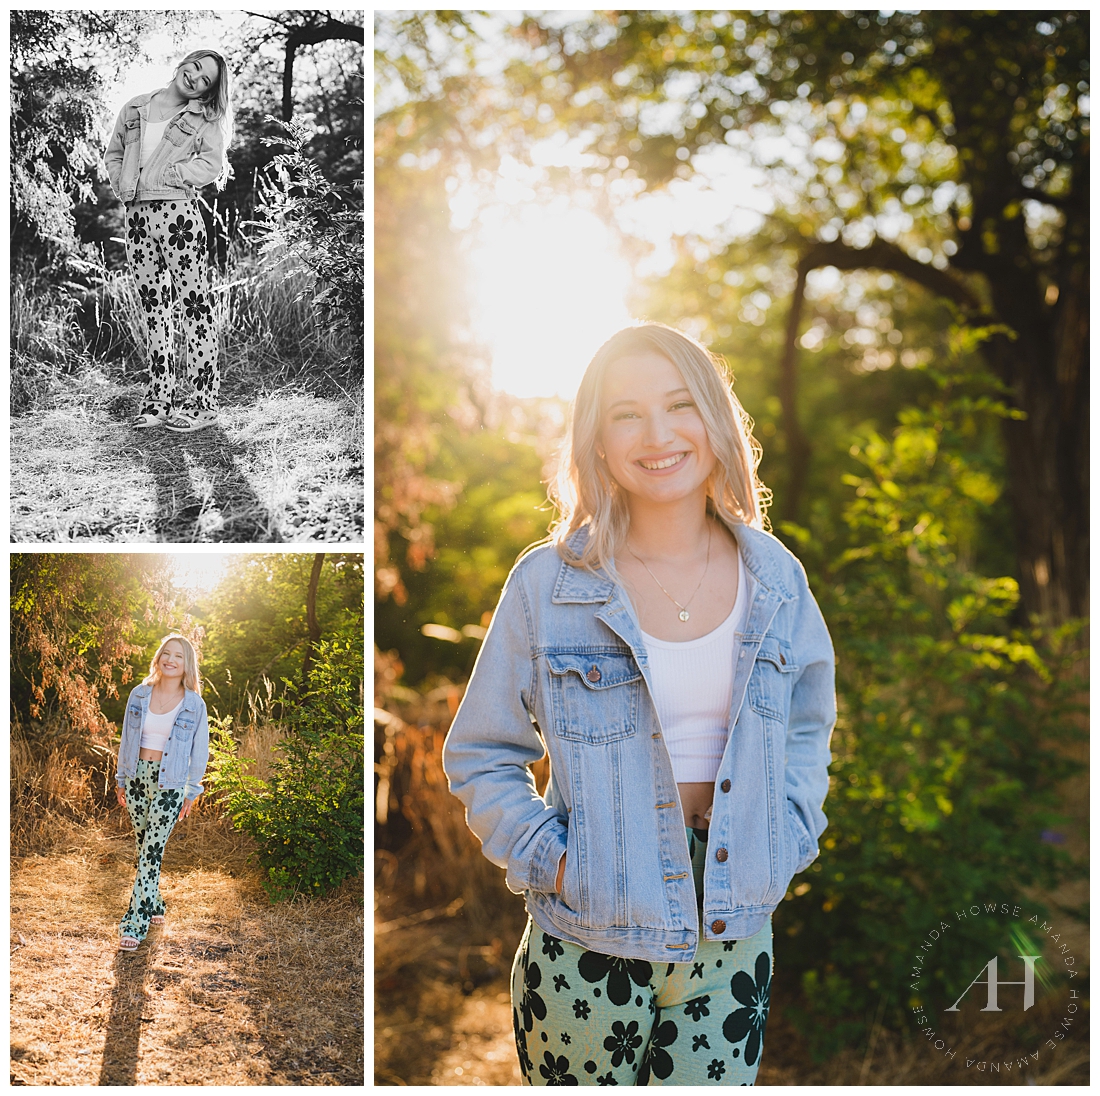 Stunning Golden Hour Senior Portraits | Summertime Seniors | Photographed by the Best Tacoma, Washington Senior Photographer Amanda Howse Photography